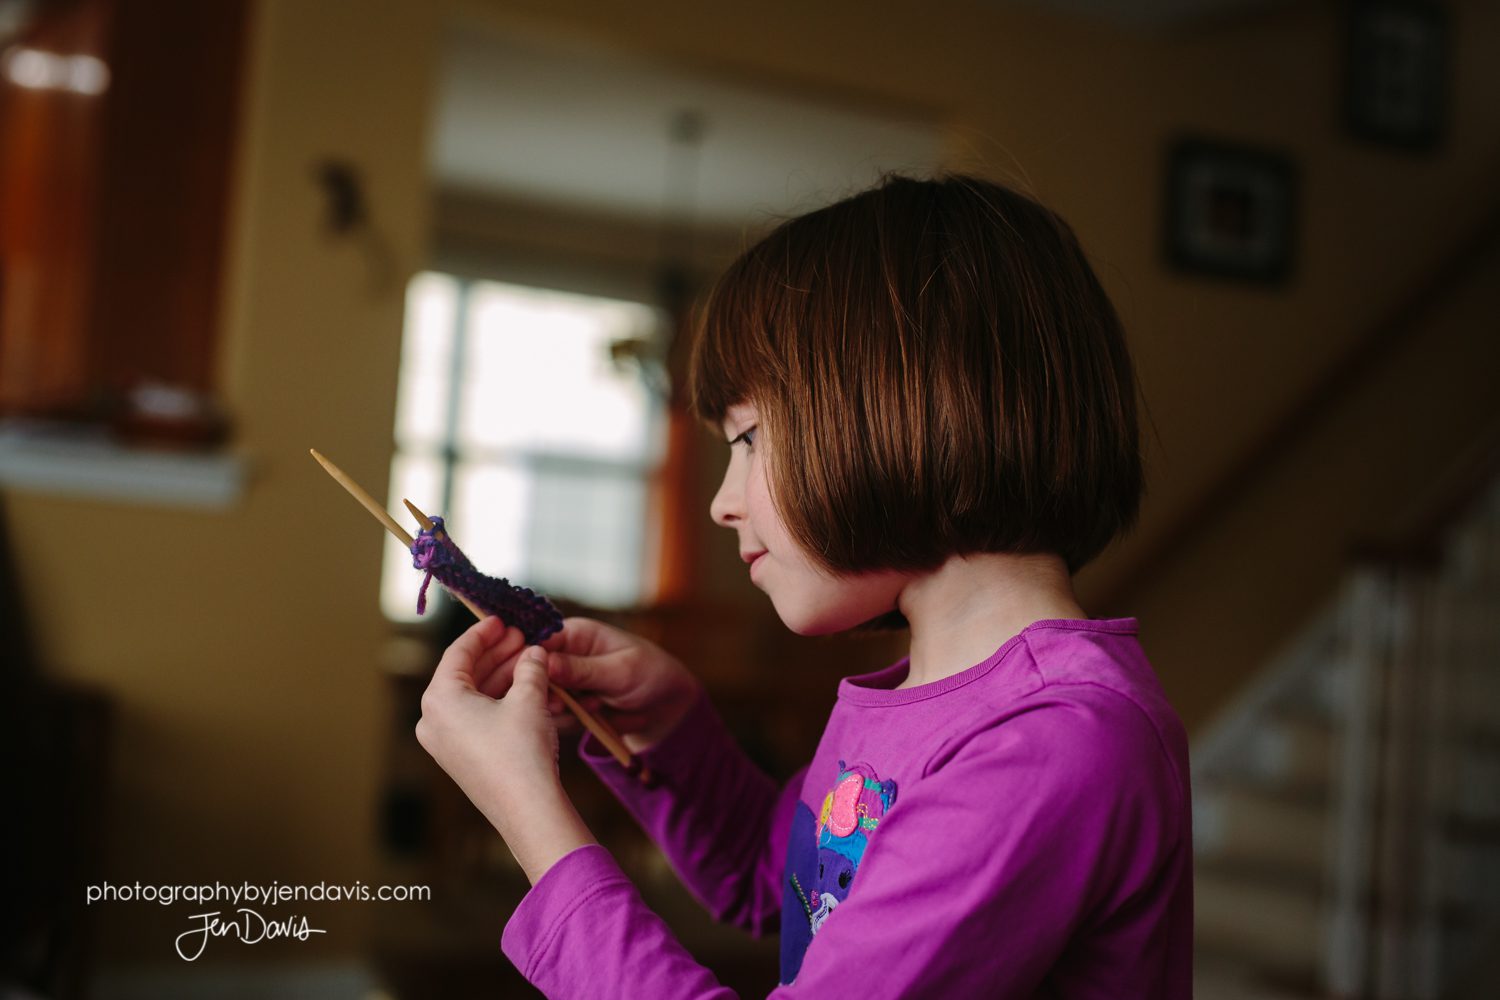 7 year old girl knitting indoors